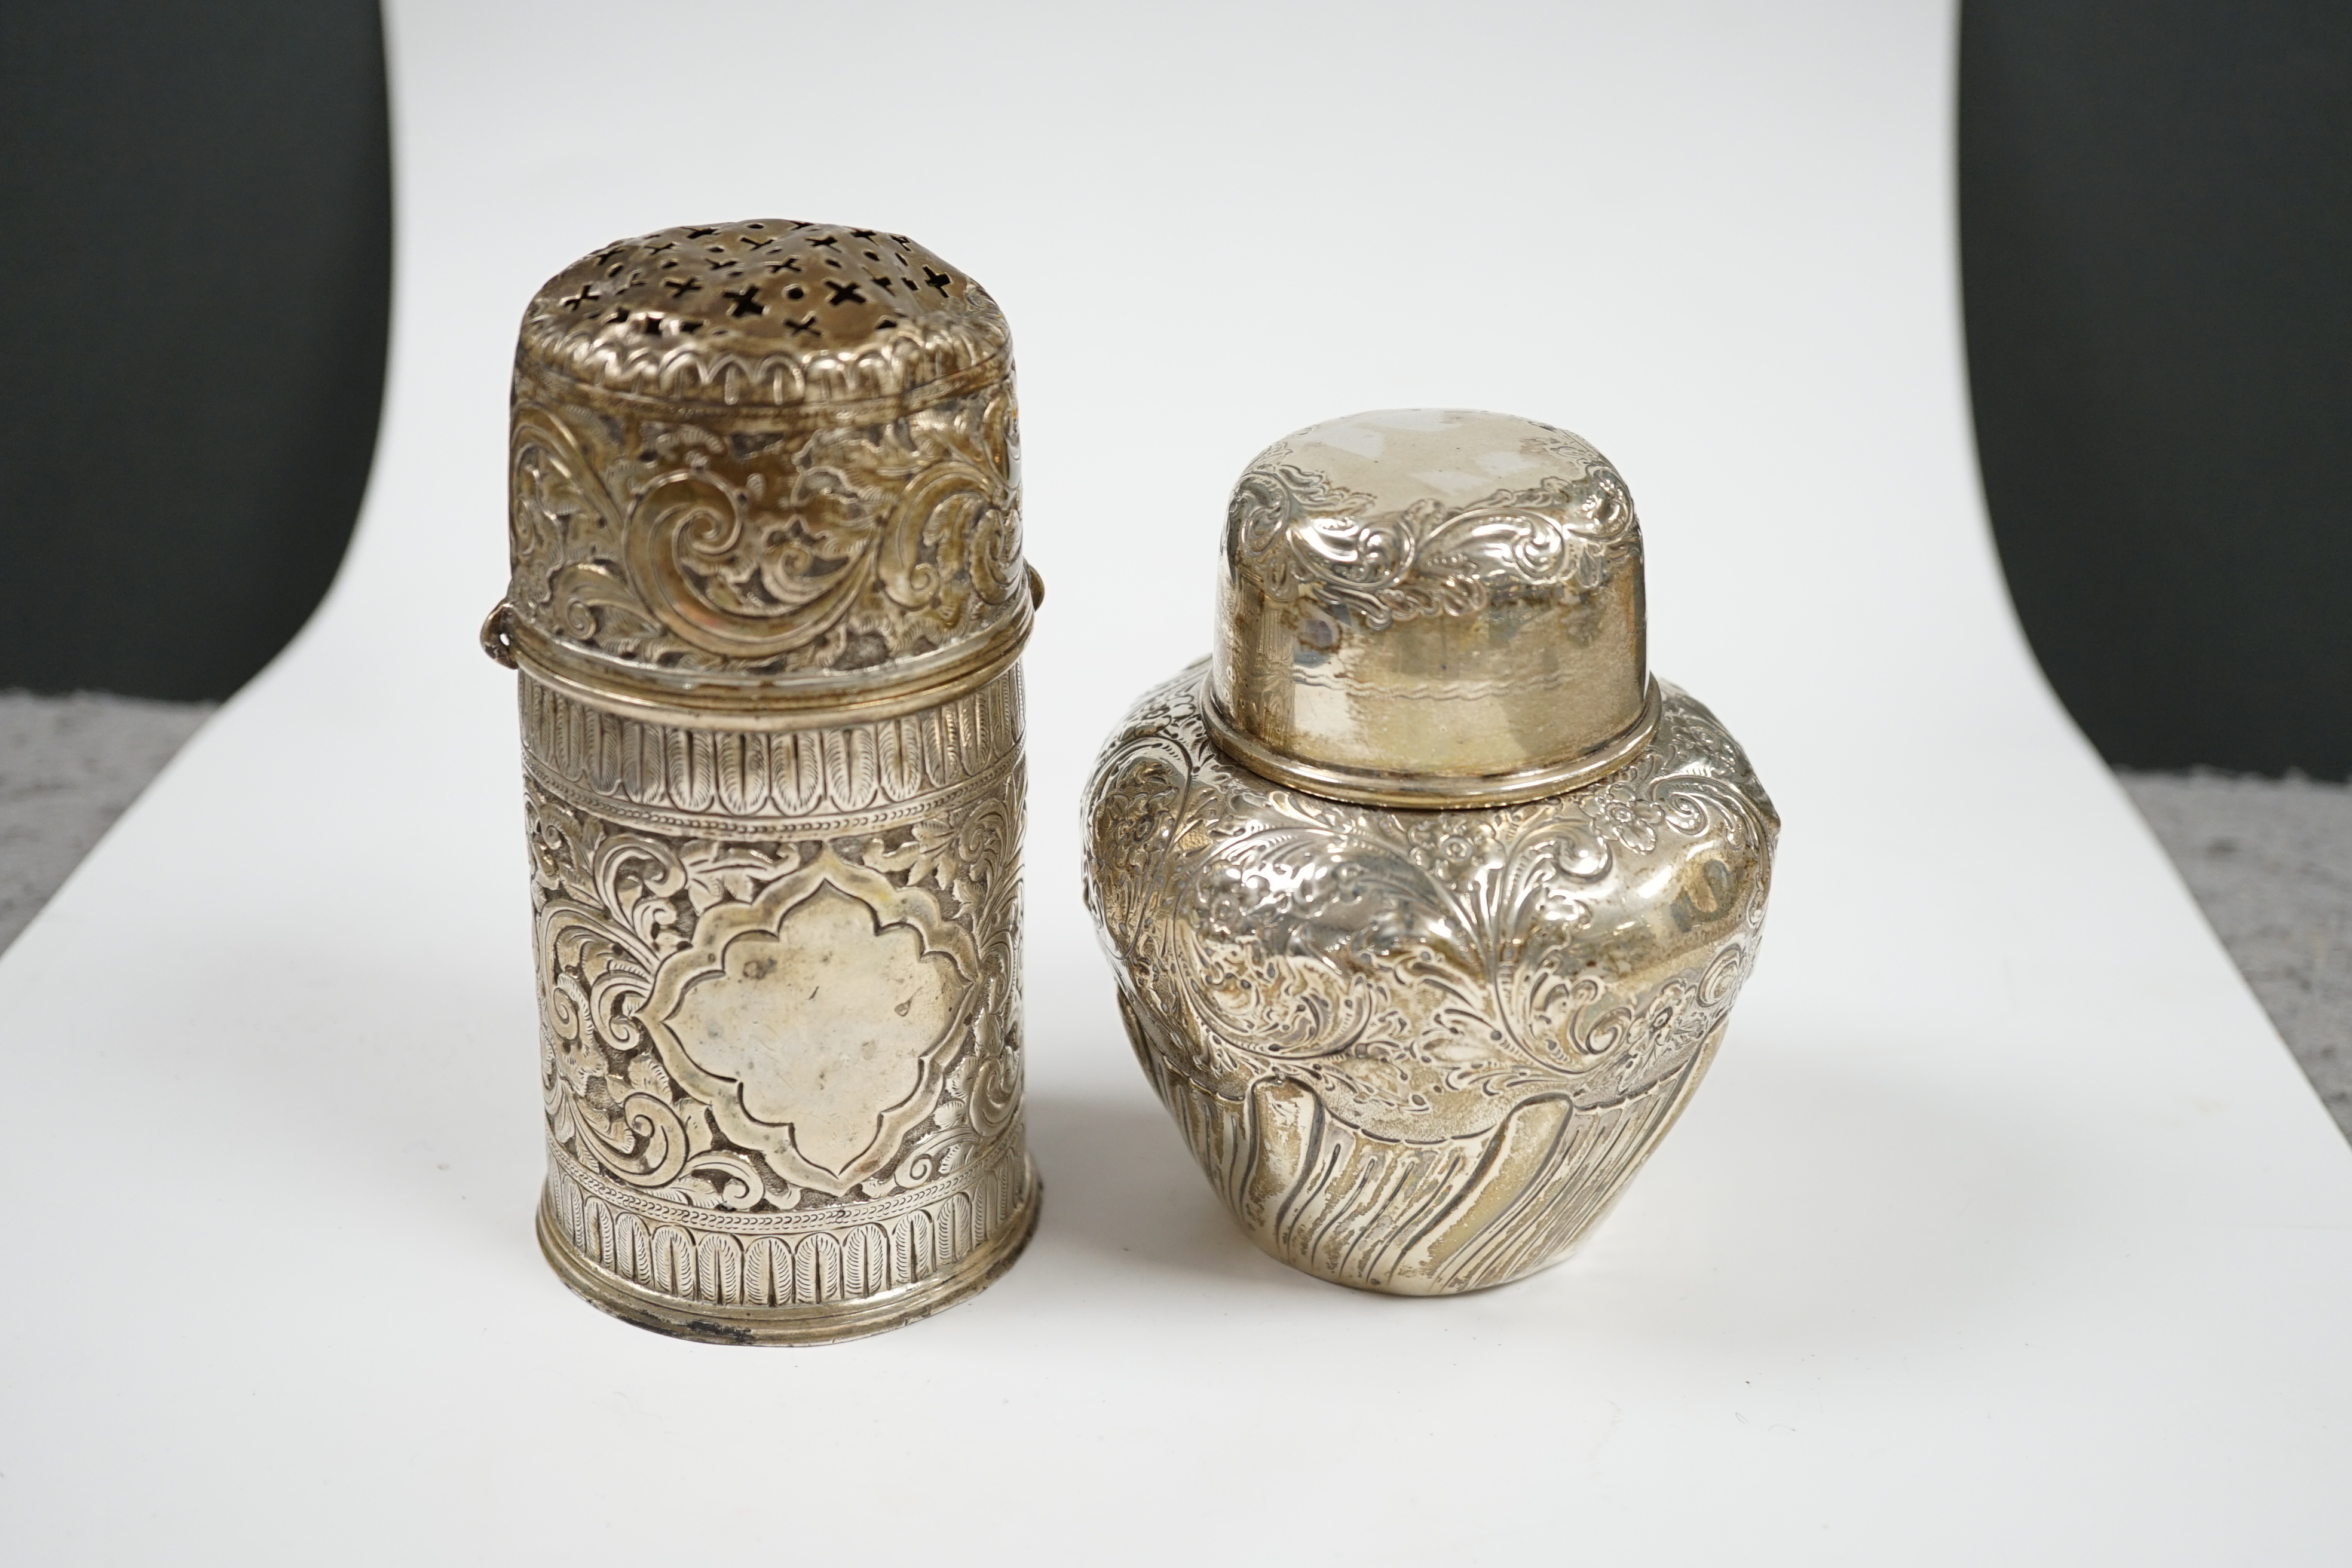 A late Victorian repousse demi-fluted wrythened silver tea caddy and cover, W & C Sissons, London, 1895, 10.3cm, together with a similar repousse silver lighthouse sugar caster, London, 1888, 10oz. Condition - poor